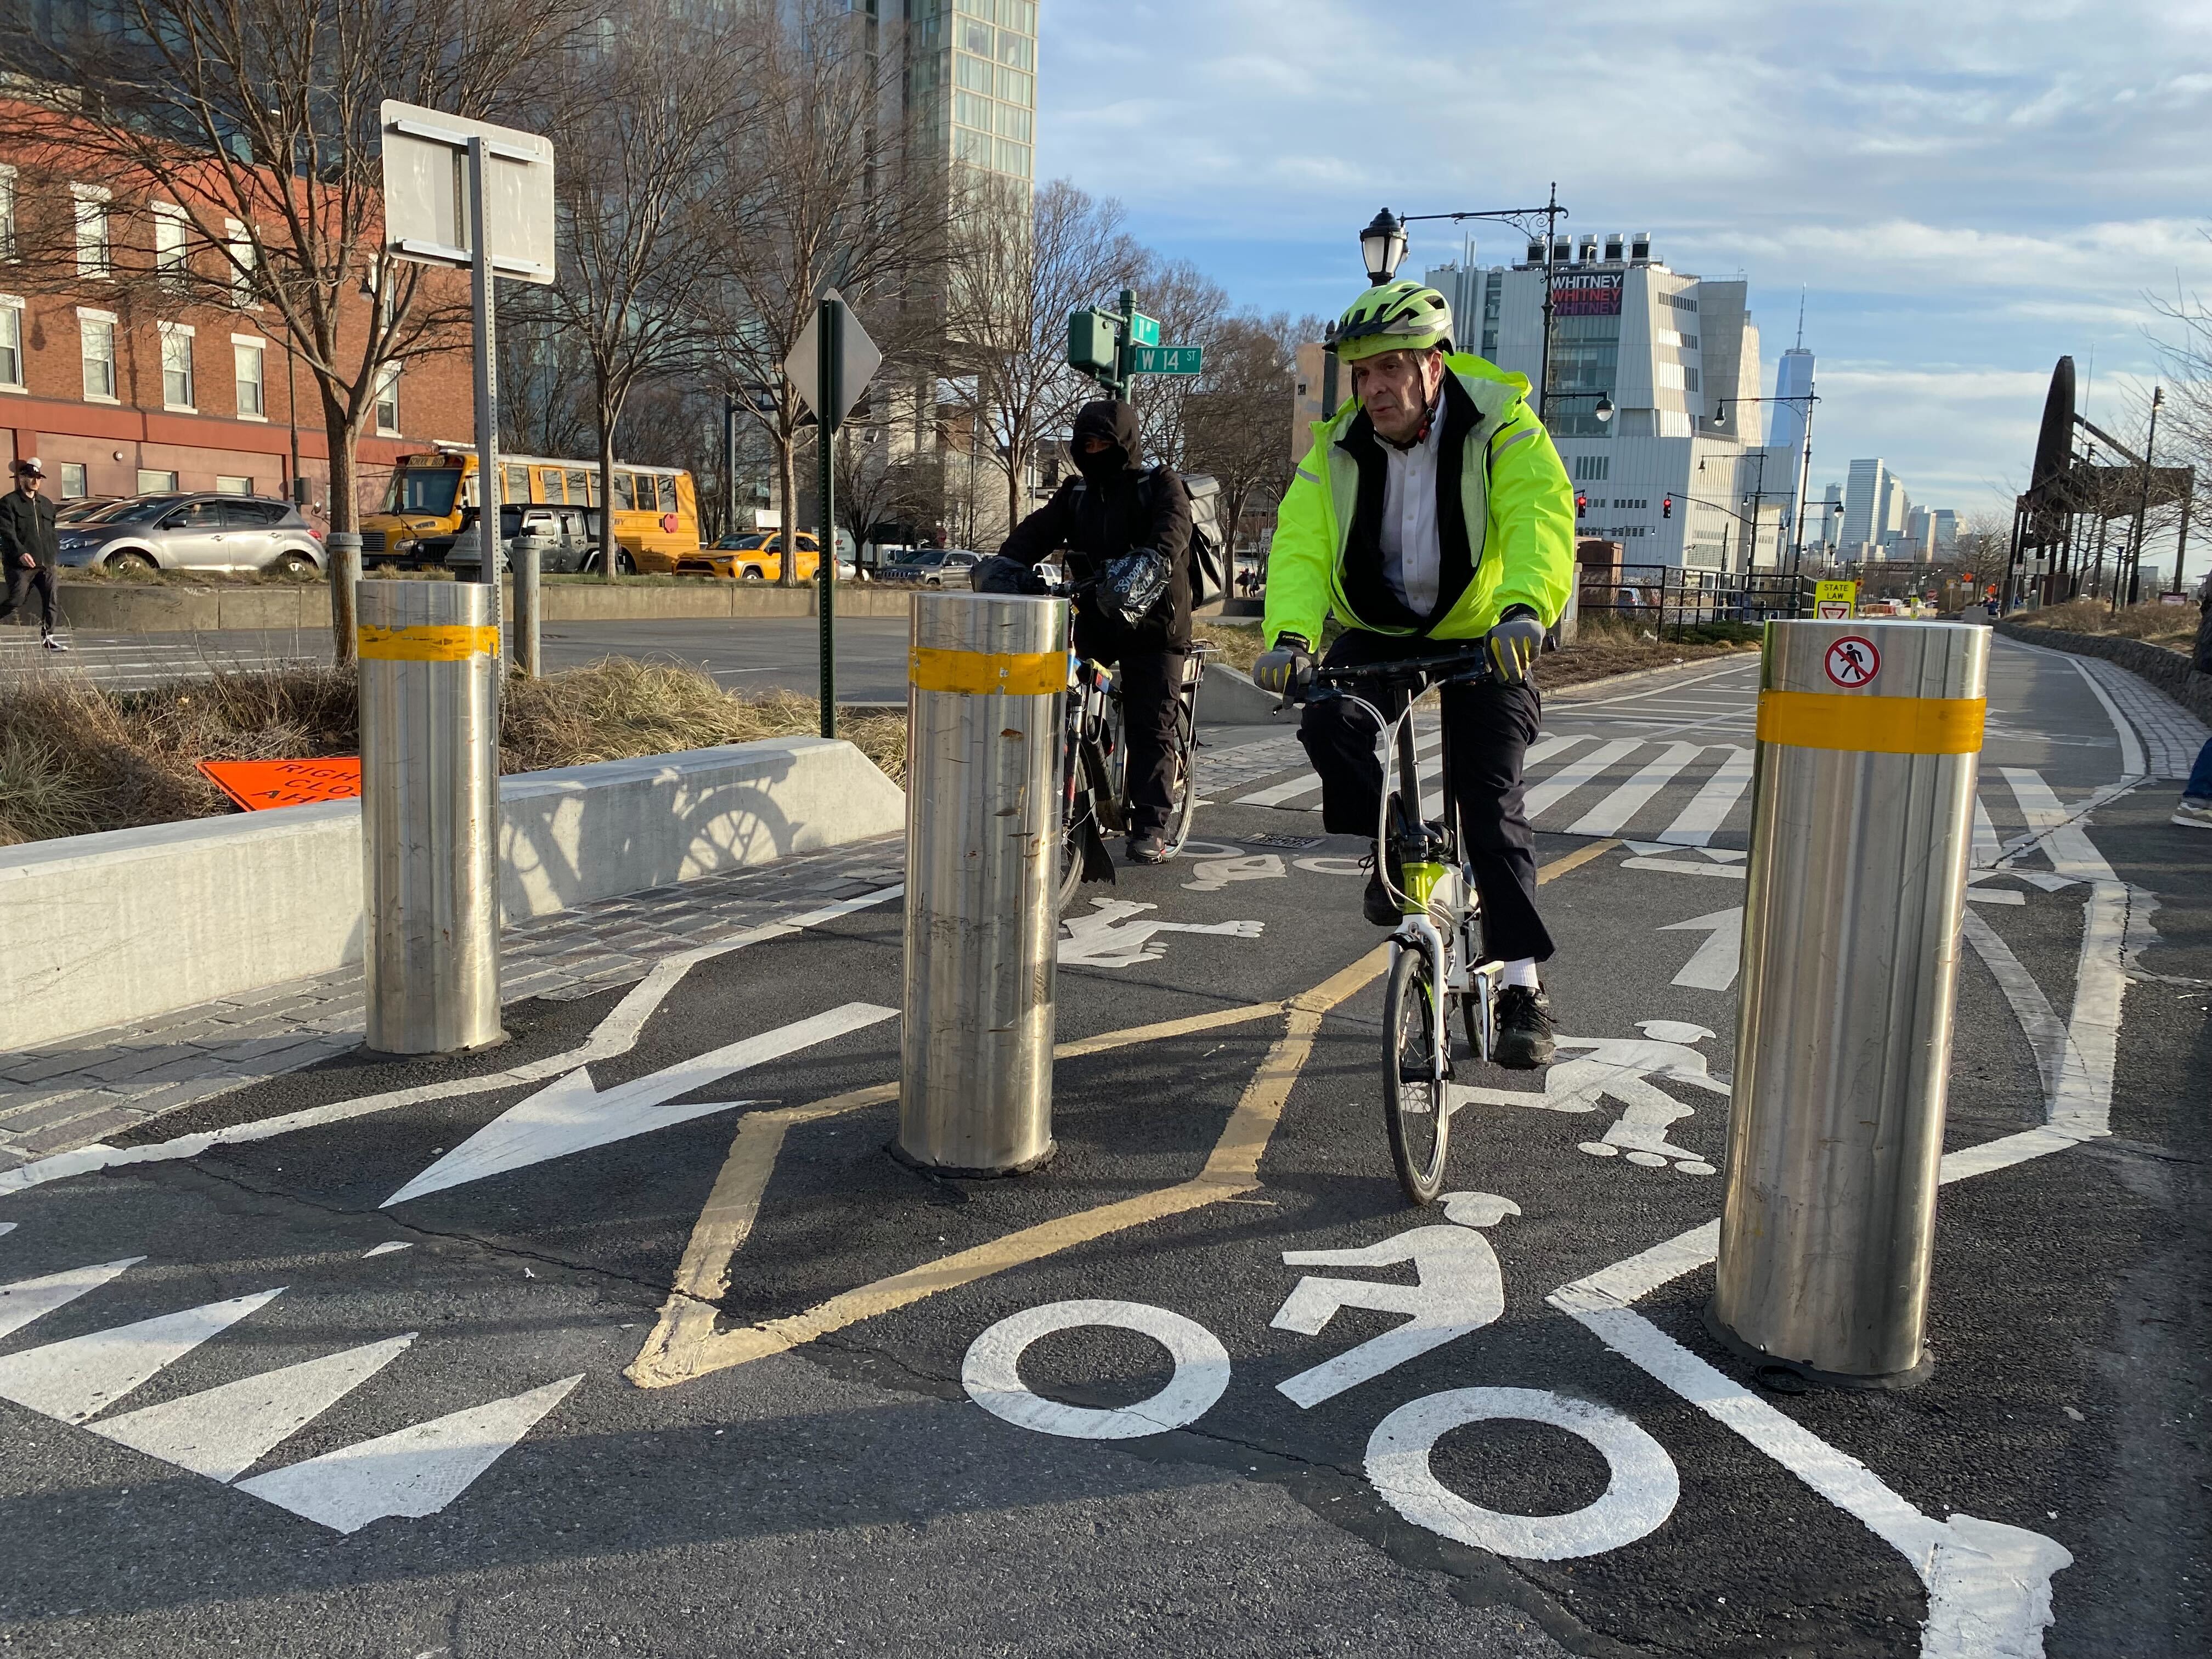 A cyclist rides between two steel bollards on a path near the Hudson River.